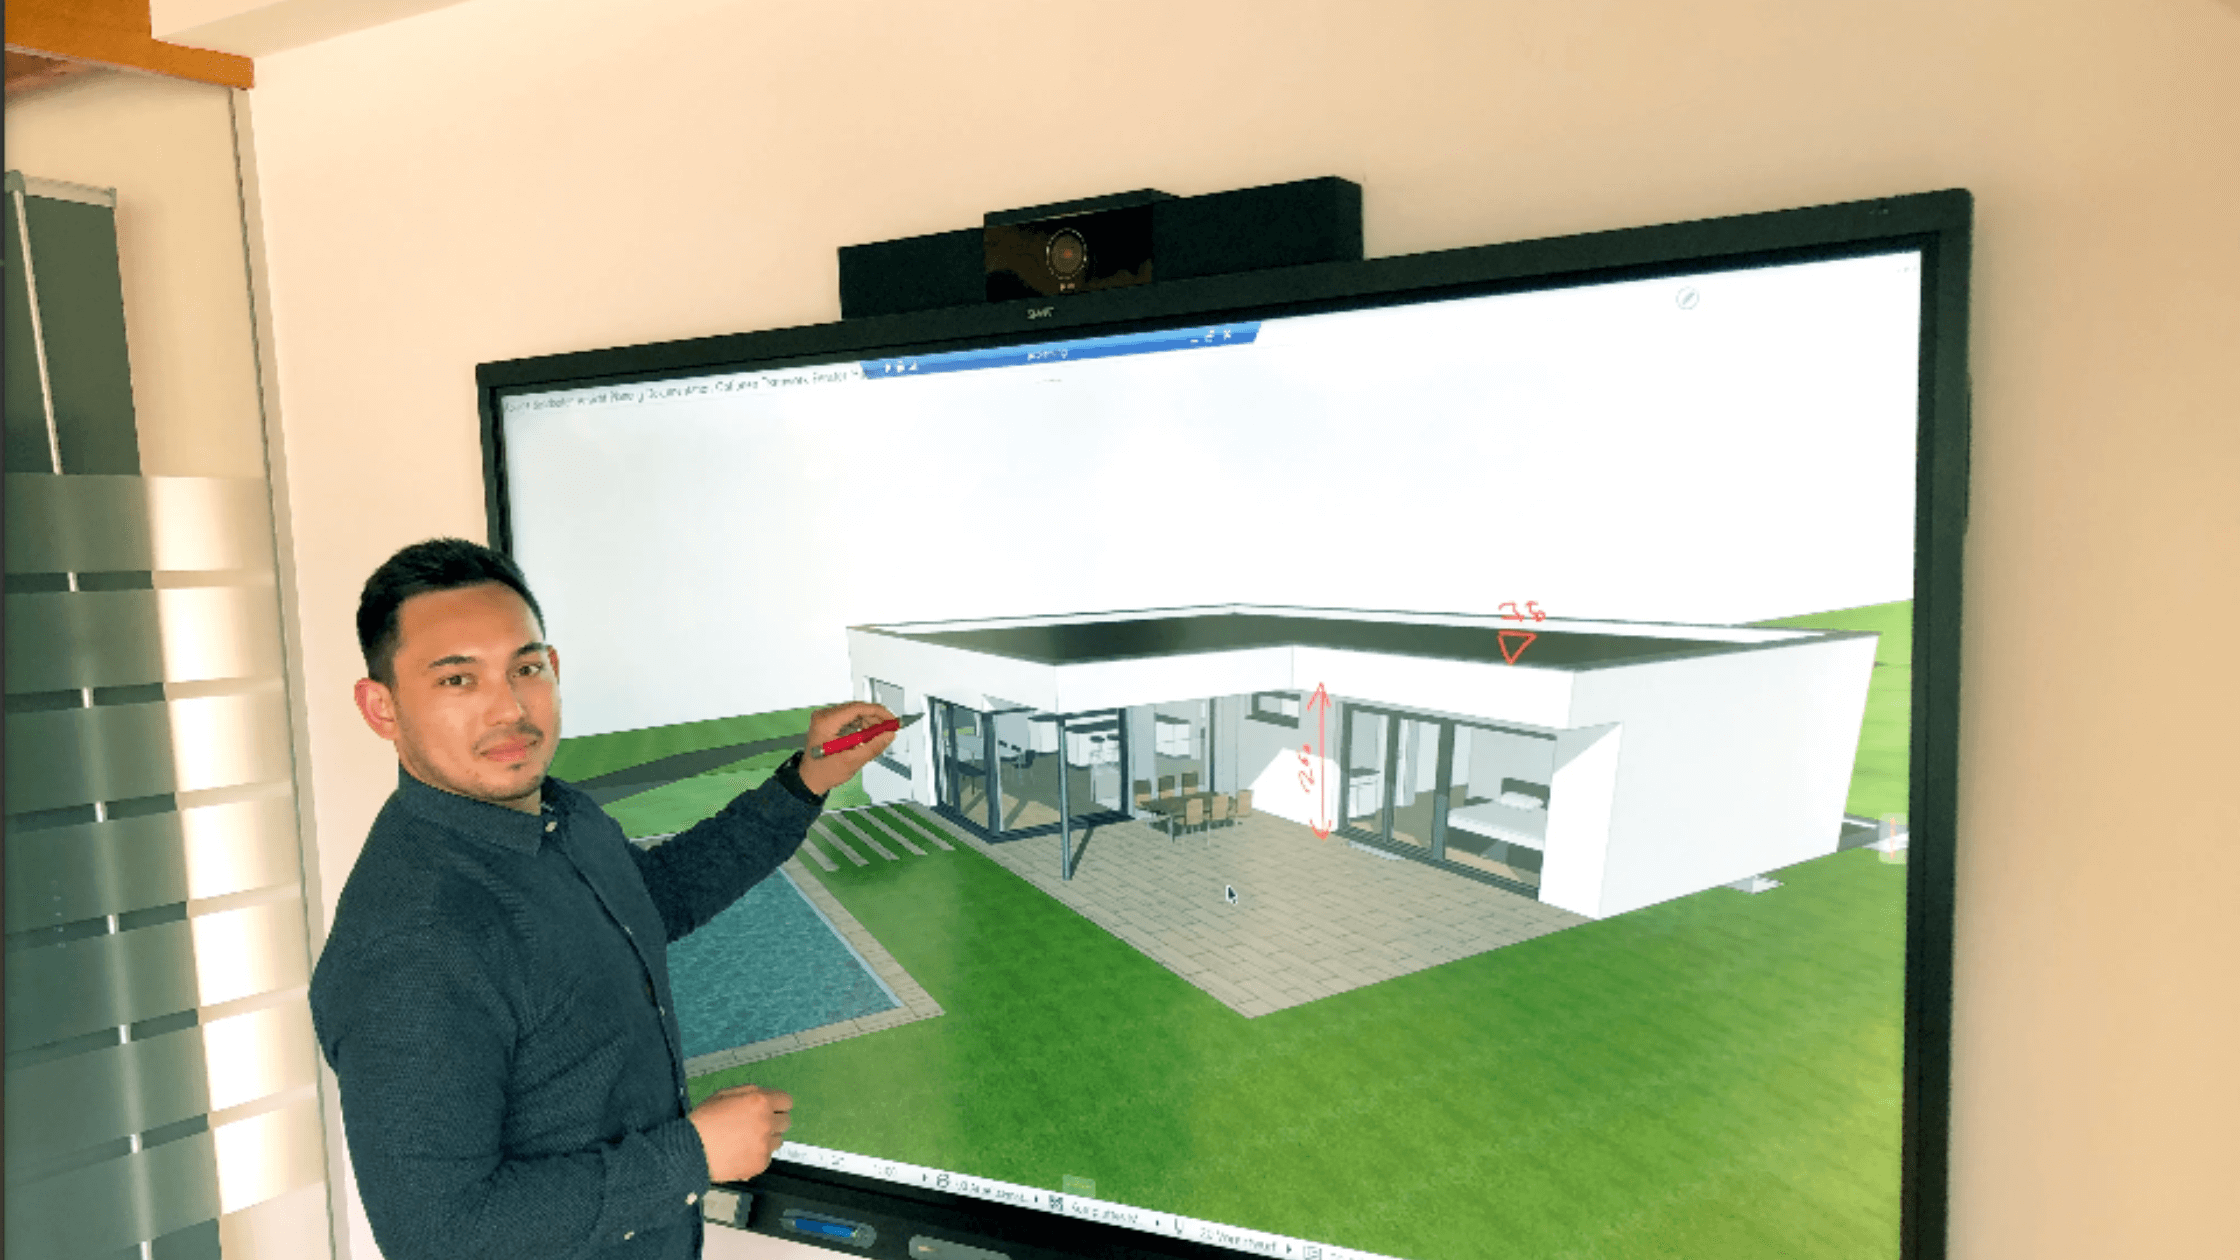 Owner of WachbergerBau, Werner Kopatsch, interacting with a 3D home rendering with a SMART 7086 series for business.